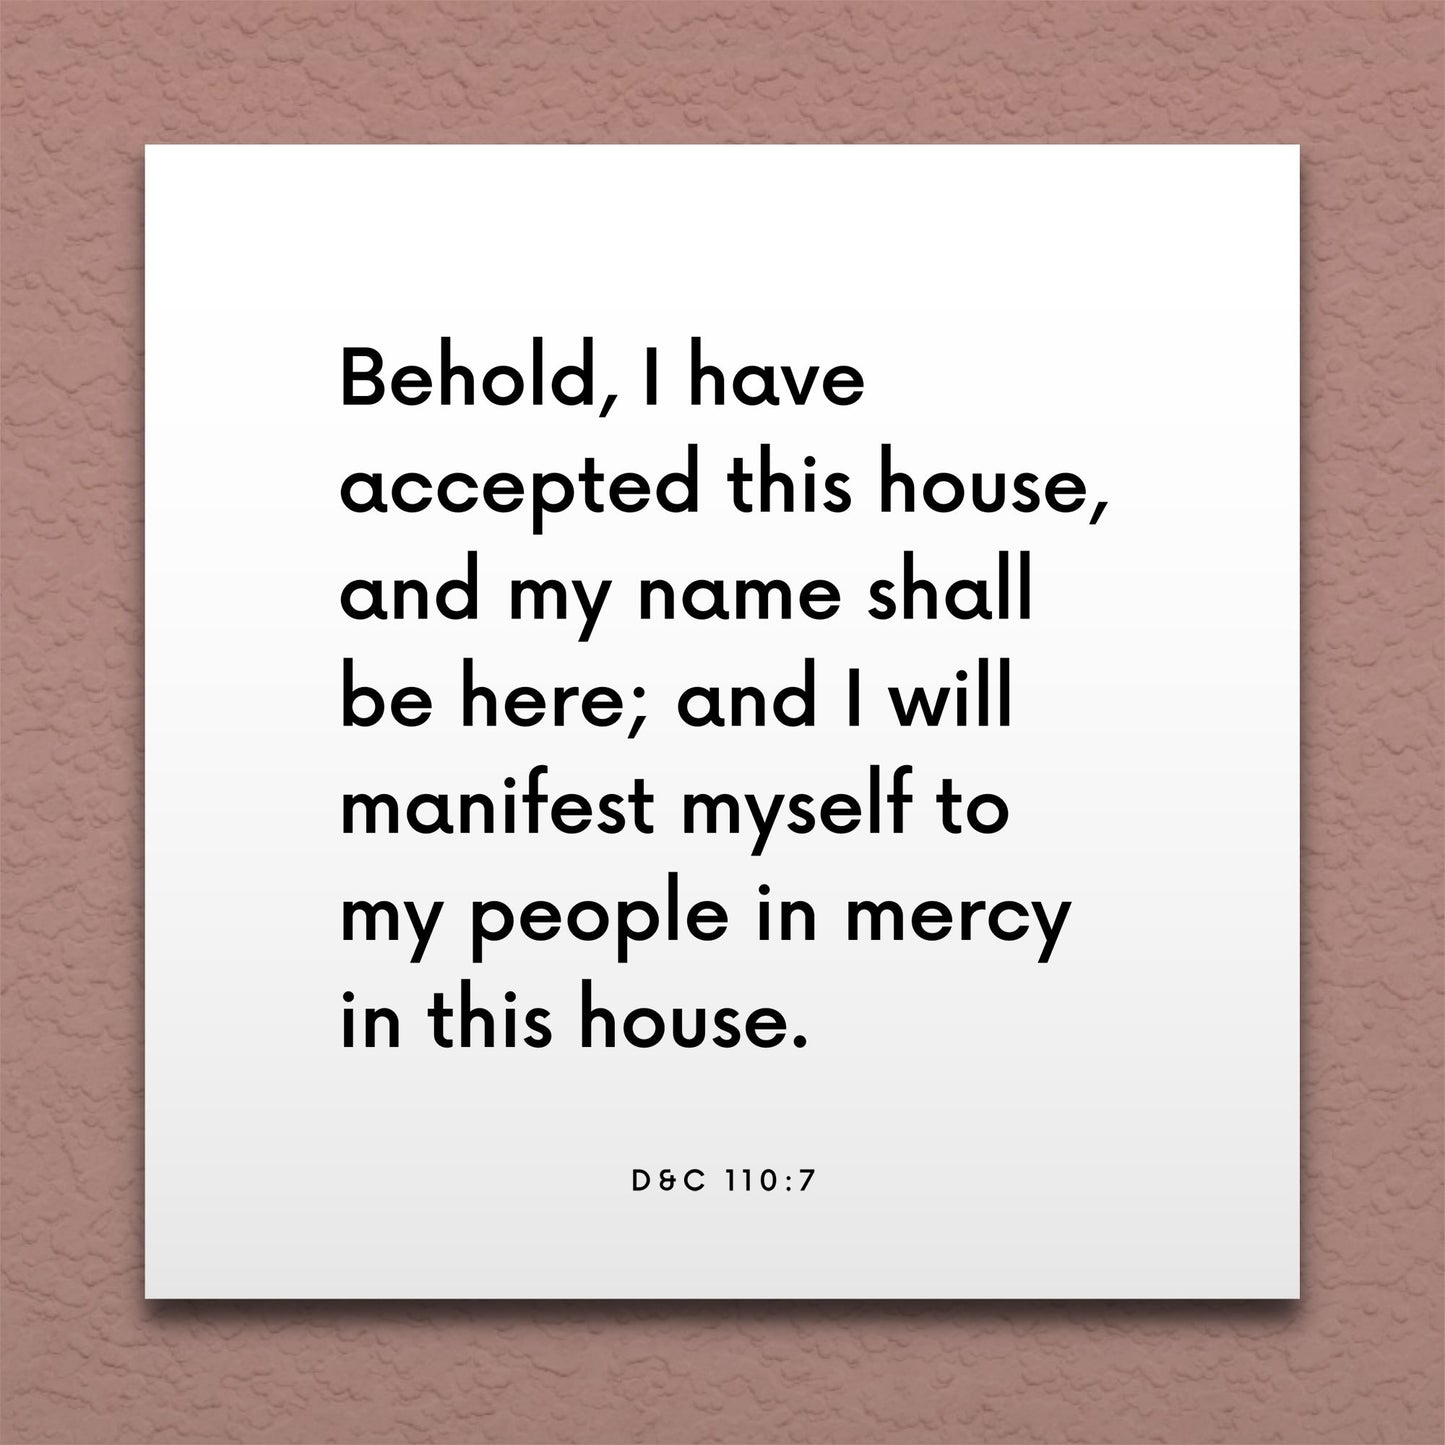 Wall-mounted scripture tile for D&C 110:7 - "I have accepted this house, and my name shall be here"